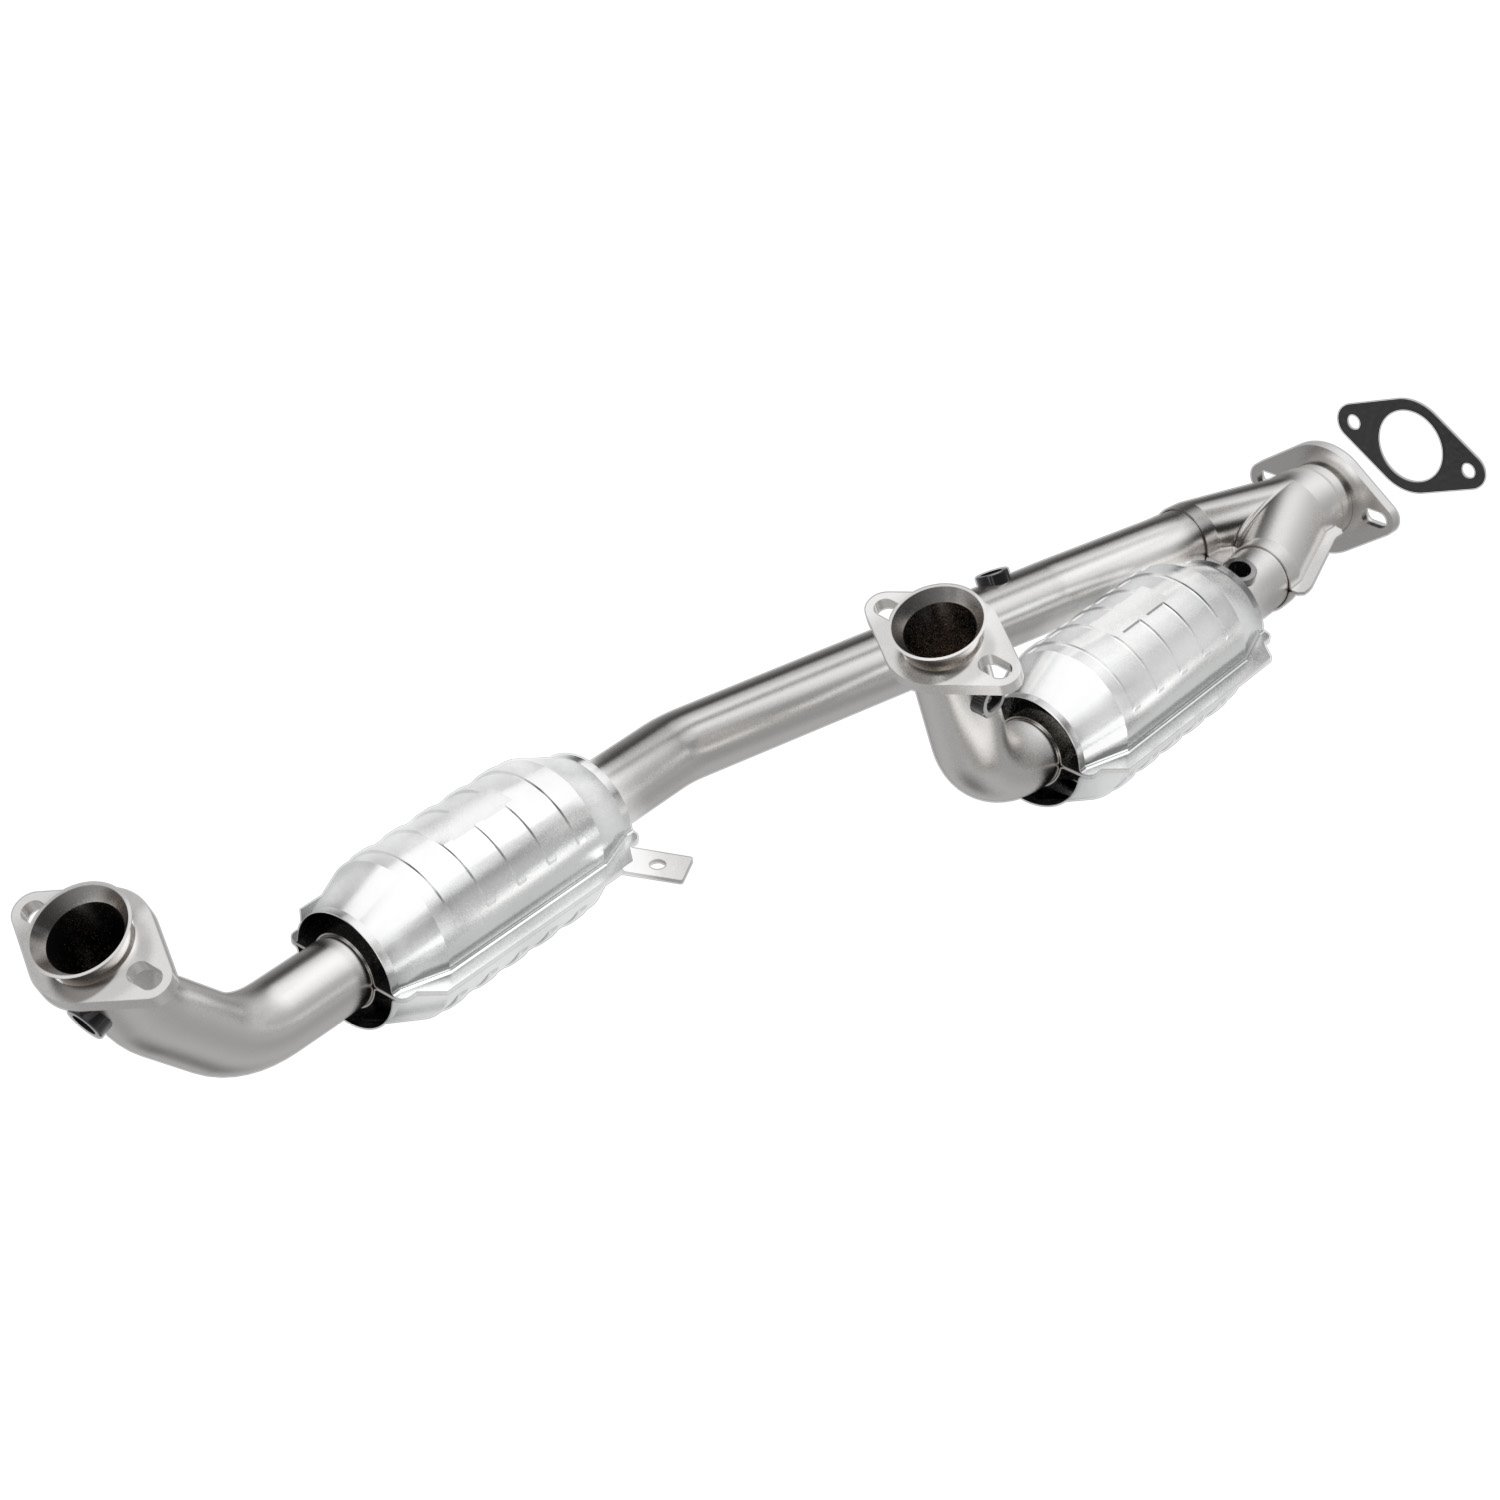 1995-1997 Ford Windstar HM Grade Federal / EPA Compliant Direct-Fit Catalytic Converter